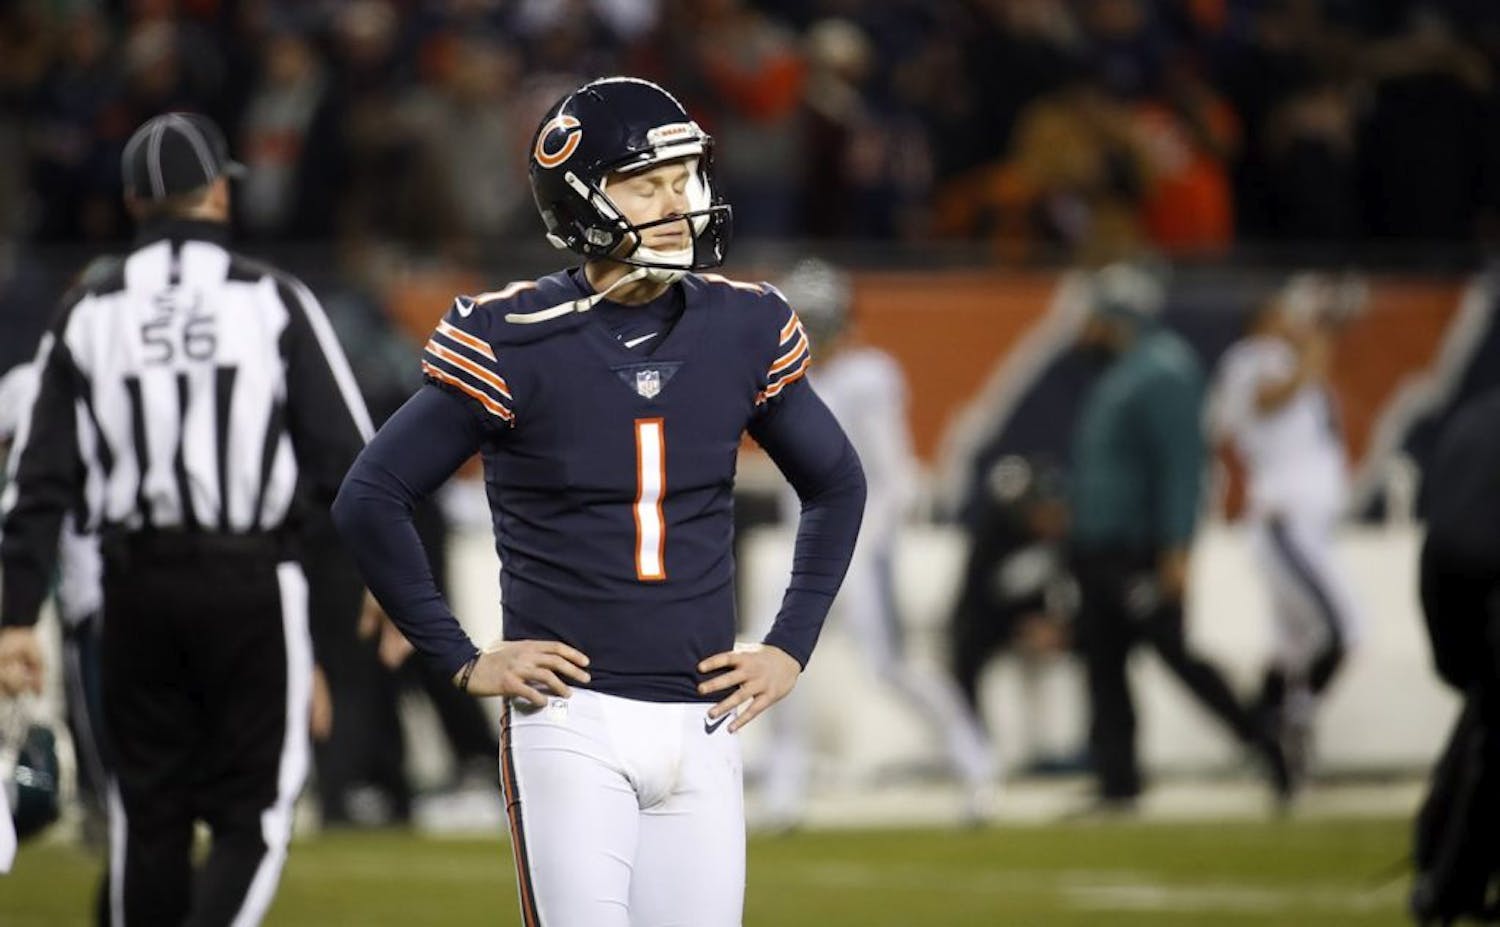 NFL: Bears bite the dust as Eagles march on in play-offs